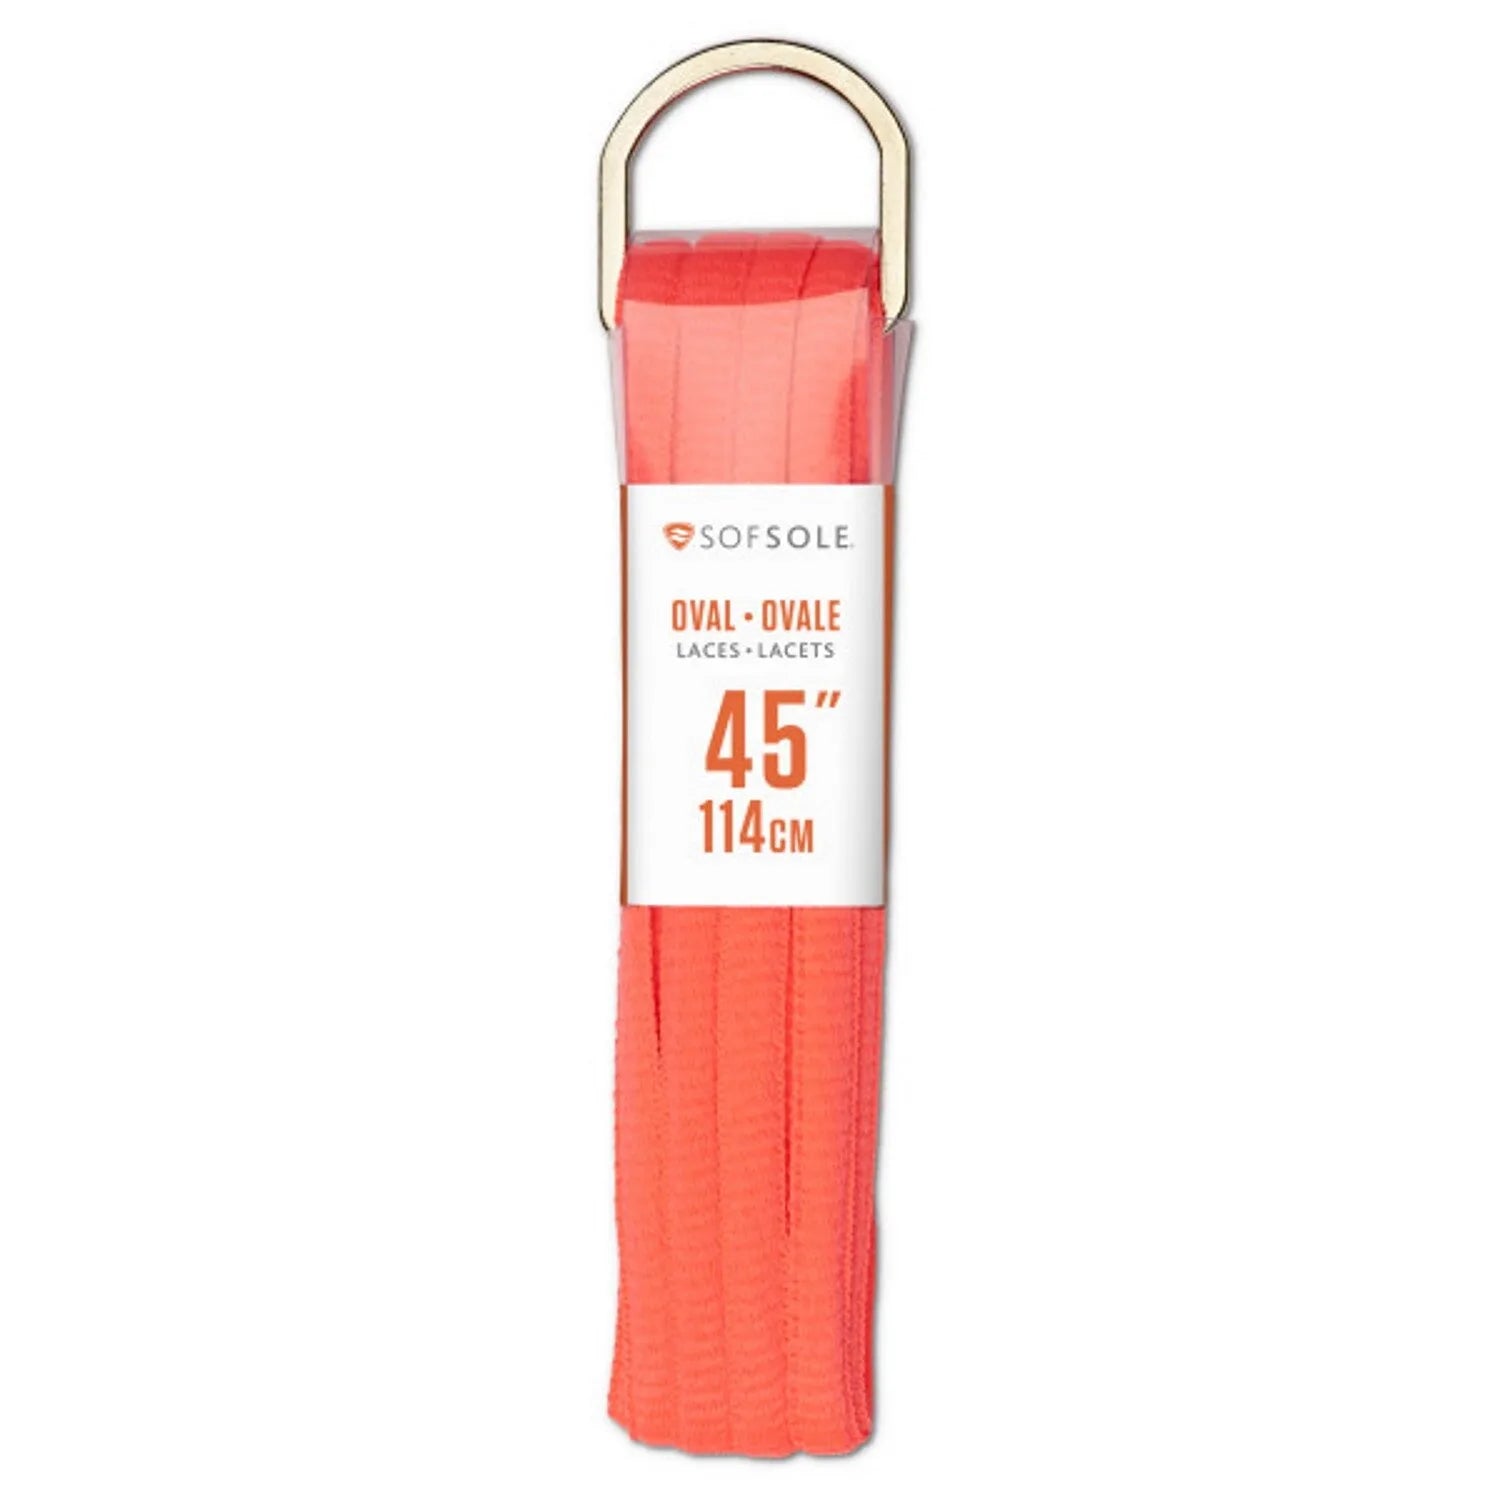 SofSole 45" Oval Shoe Laces - Coral